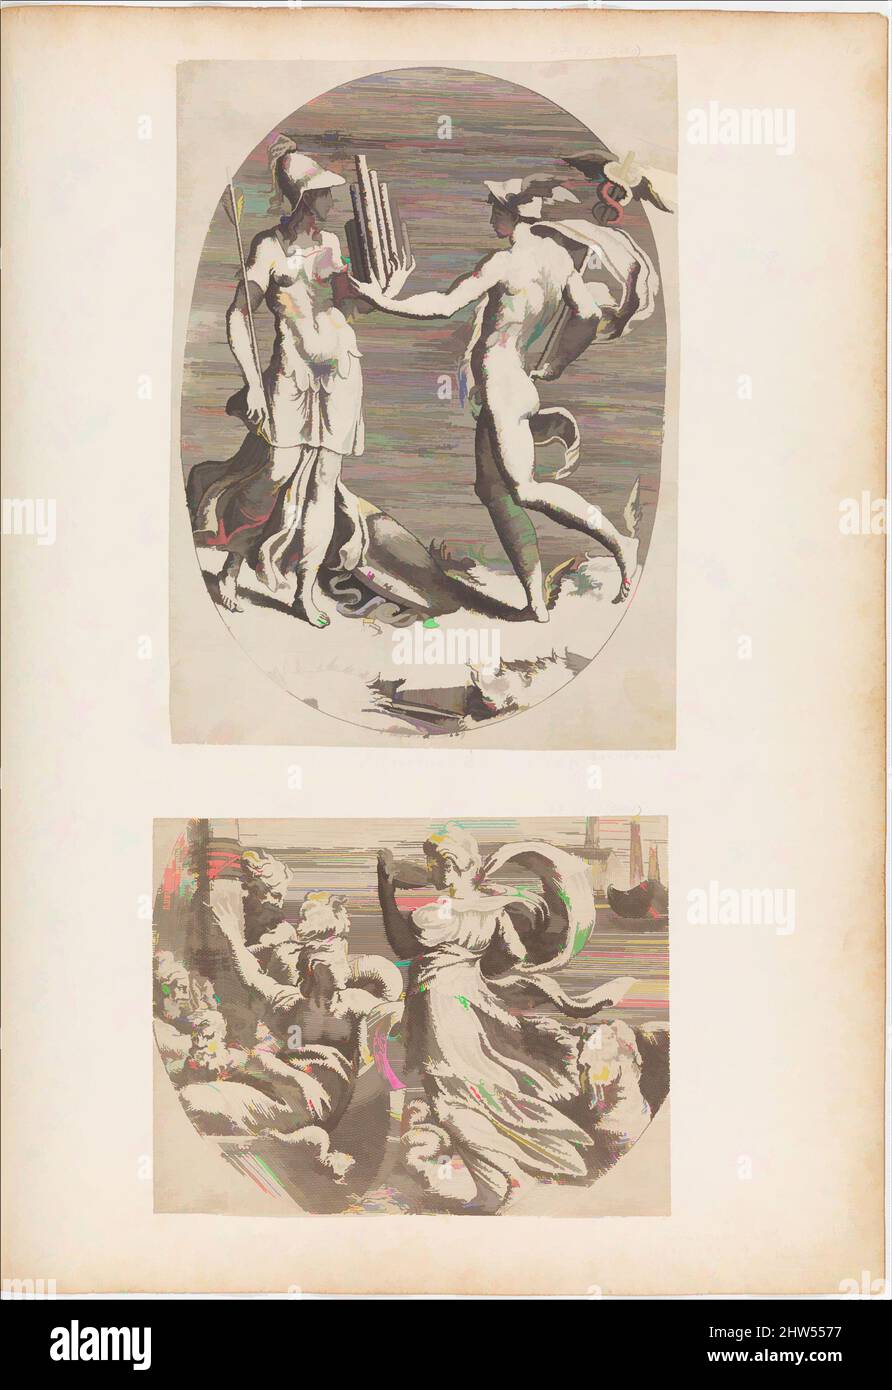 Art inspired by Mercury Presenting a Panpipe to Minerva, Engraving, Prints, Giulio Bonasone (Italian, active Rome and Bologna, 1531–after 1576), After Parmigianino (Girolamo Francesco Maria Mazzola) (Italian, Parma 1503–1540 Casalmaggiore), In Mariette Album, folio 78, Classic works modernized by Artotop with a splash of modernity. Shapes, color and value, eye-catching visual impact on art. Emotions through freedom of artworks in a contemporary way. A timeless message pursuing a wildly creative new direction. Artists turning to the digital medium and creating the Artotop NFT Stock Photo